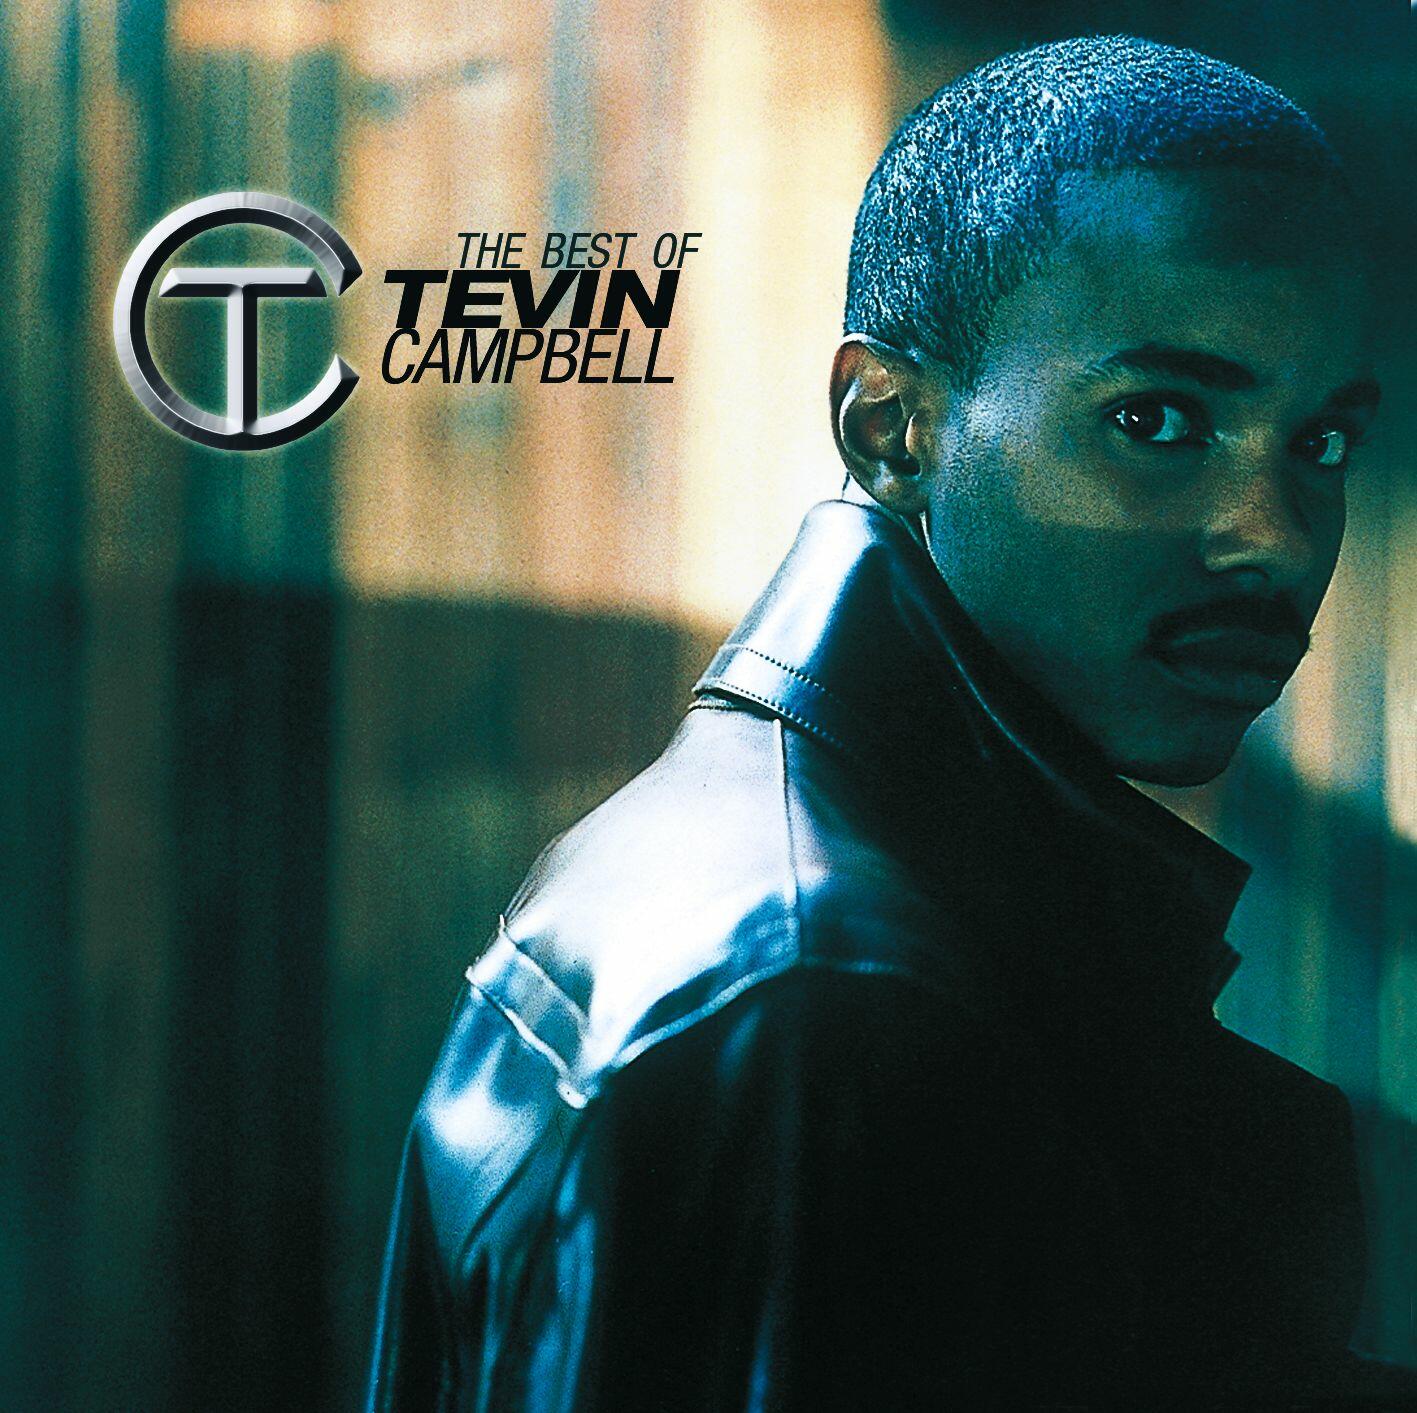 Listen Free to Tevin Campbell - The Best Of Tevin Campbell Radio on iHeartRadio ...